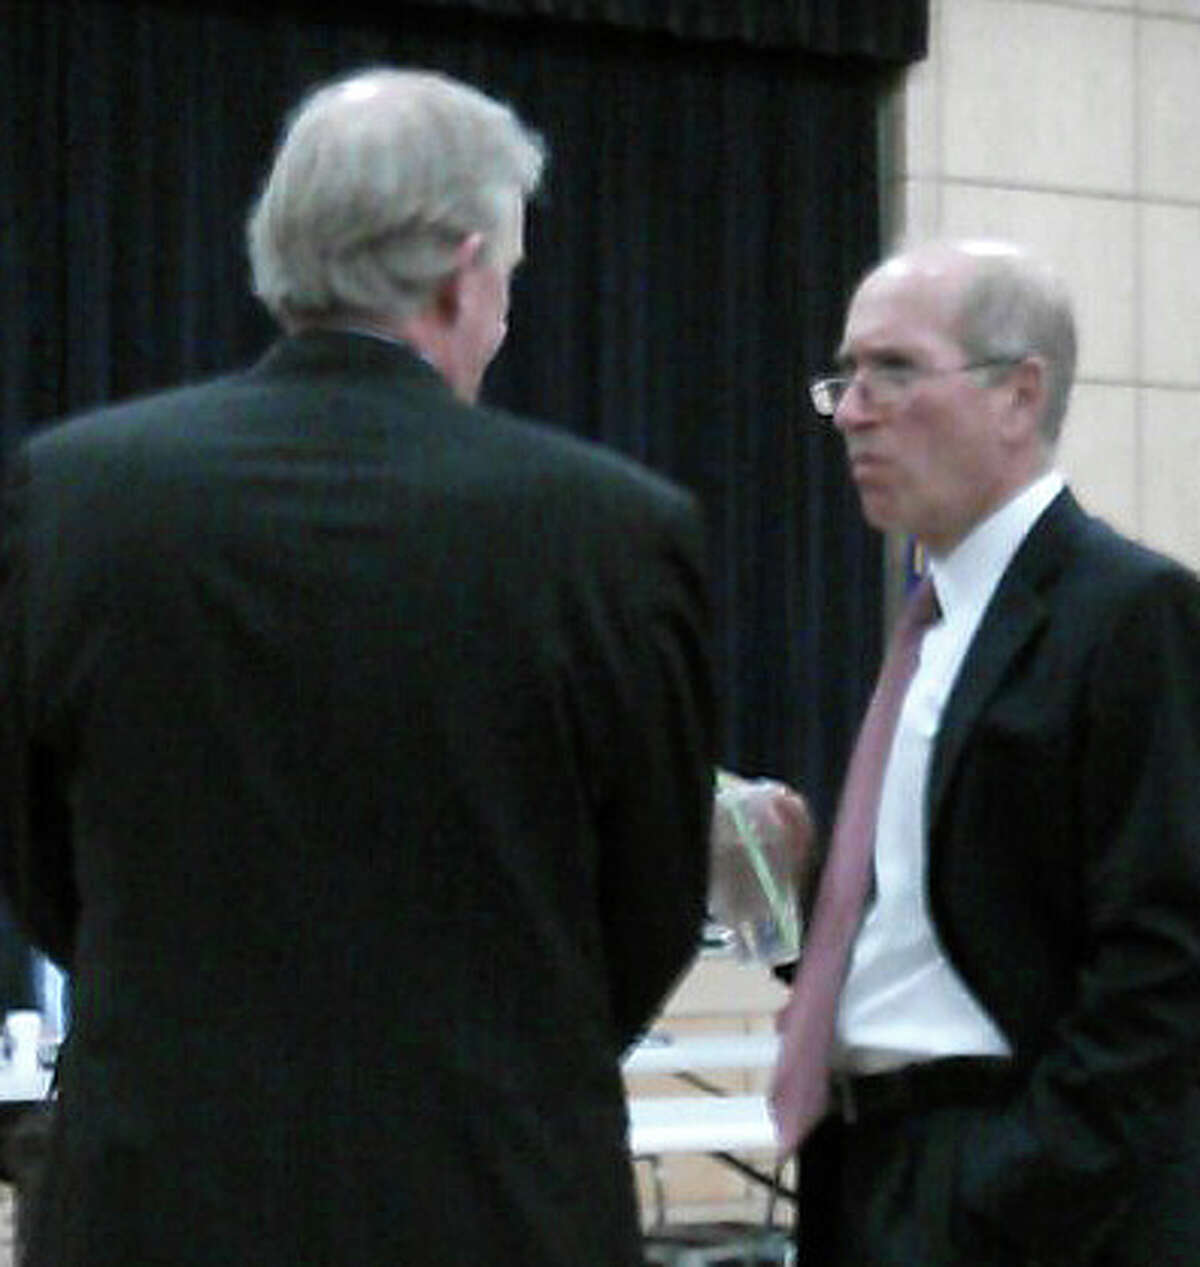 Lawyers representing opposing sides on the application to build 95 apartments on Bronson Road chat on the sidelines of Tuesday's Town Plan and Zoning Commission hearing -- John Fallon, left, represents the developer, and Joel Green argued on behalf of neighborhood oppoents.